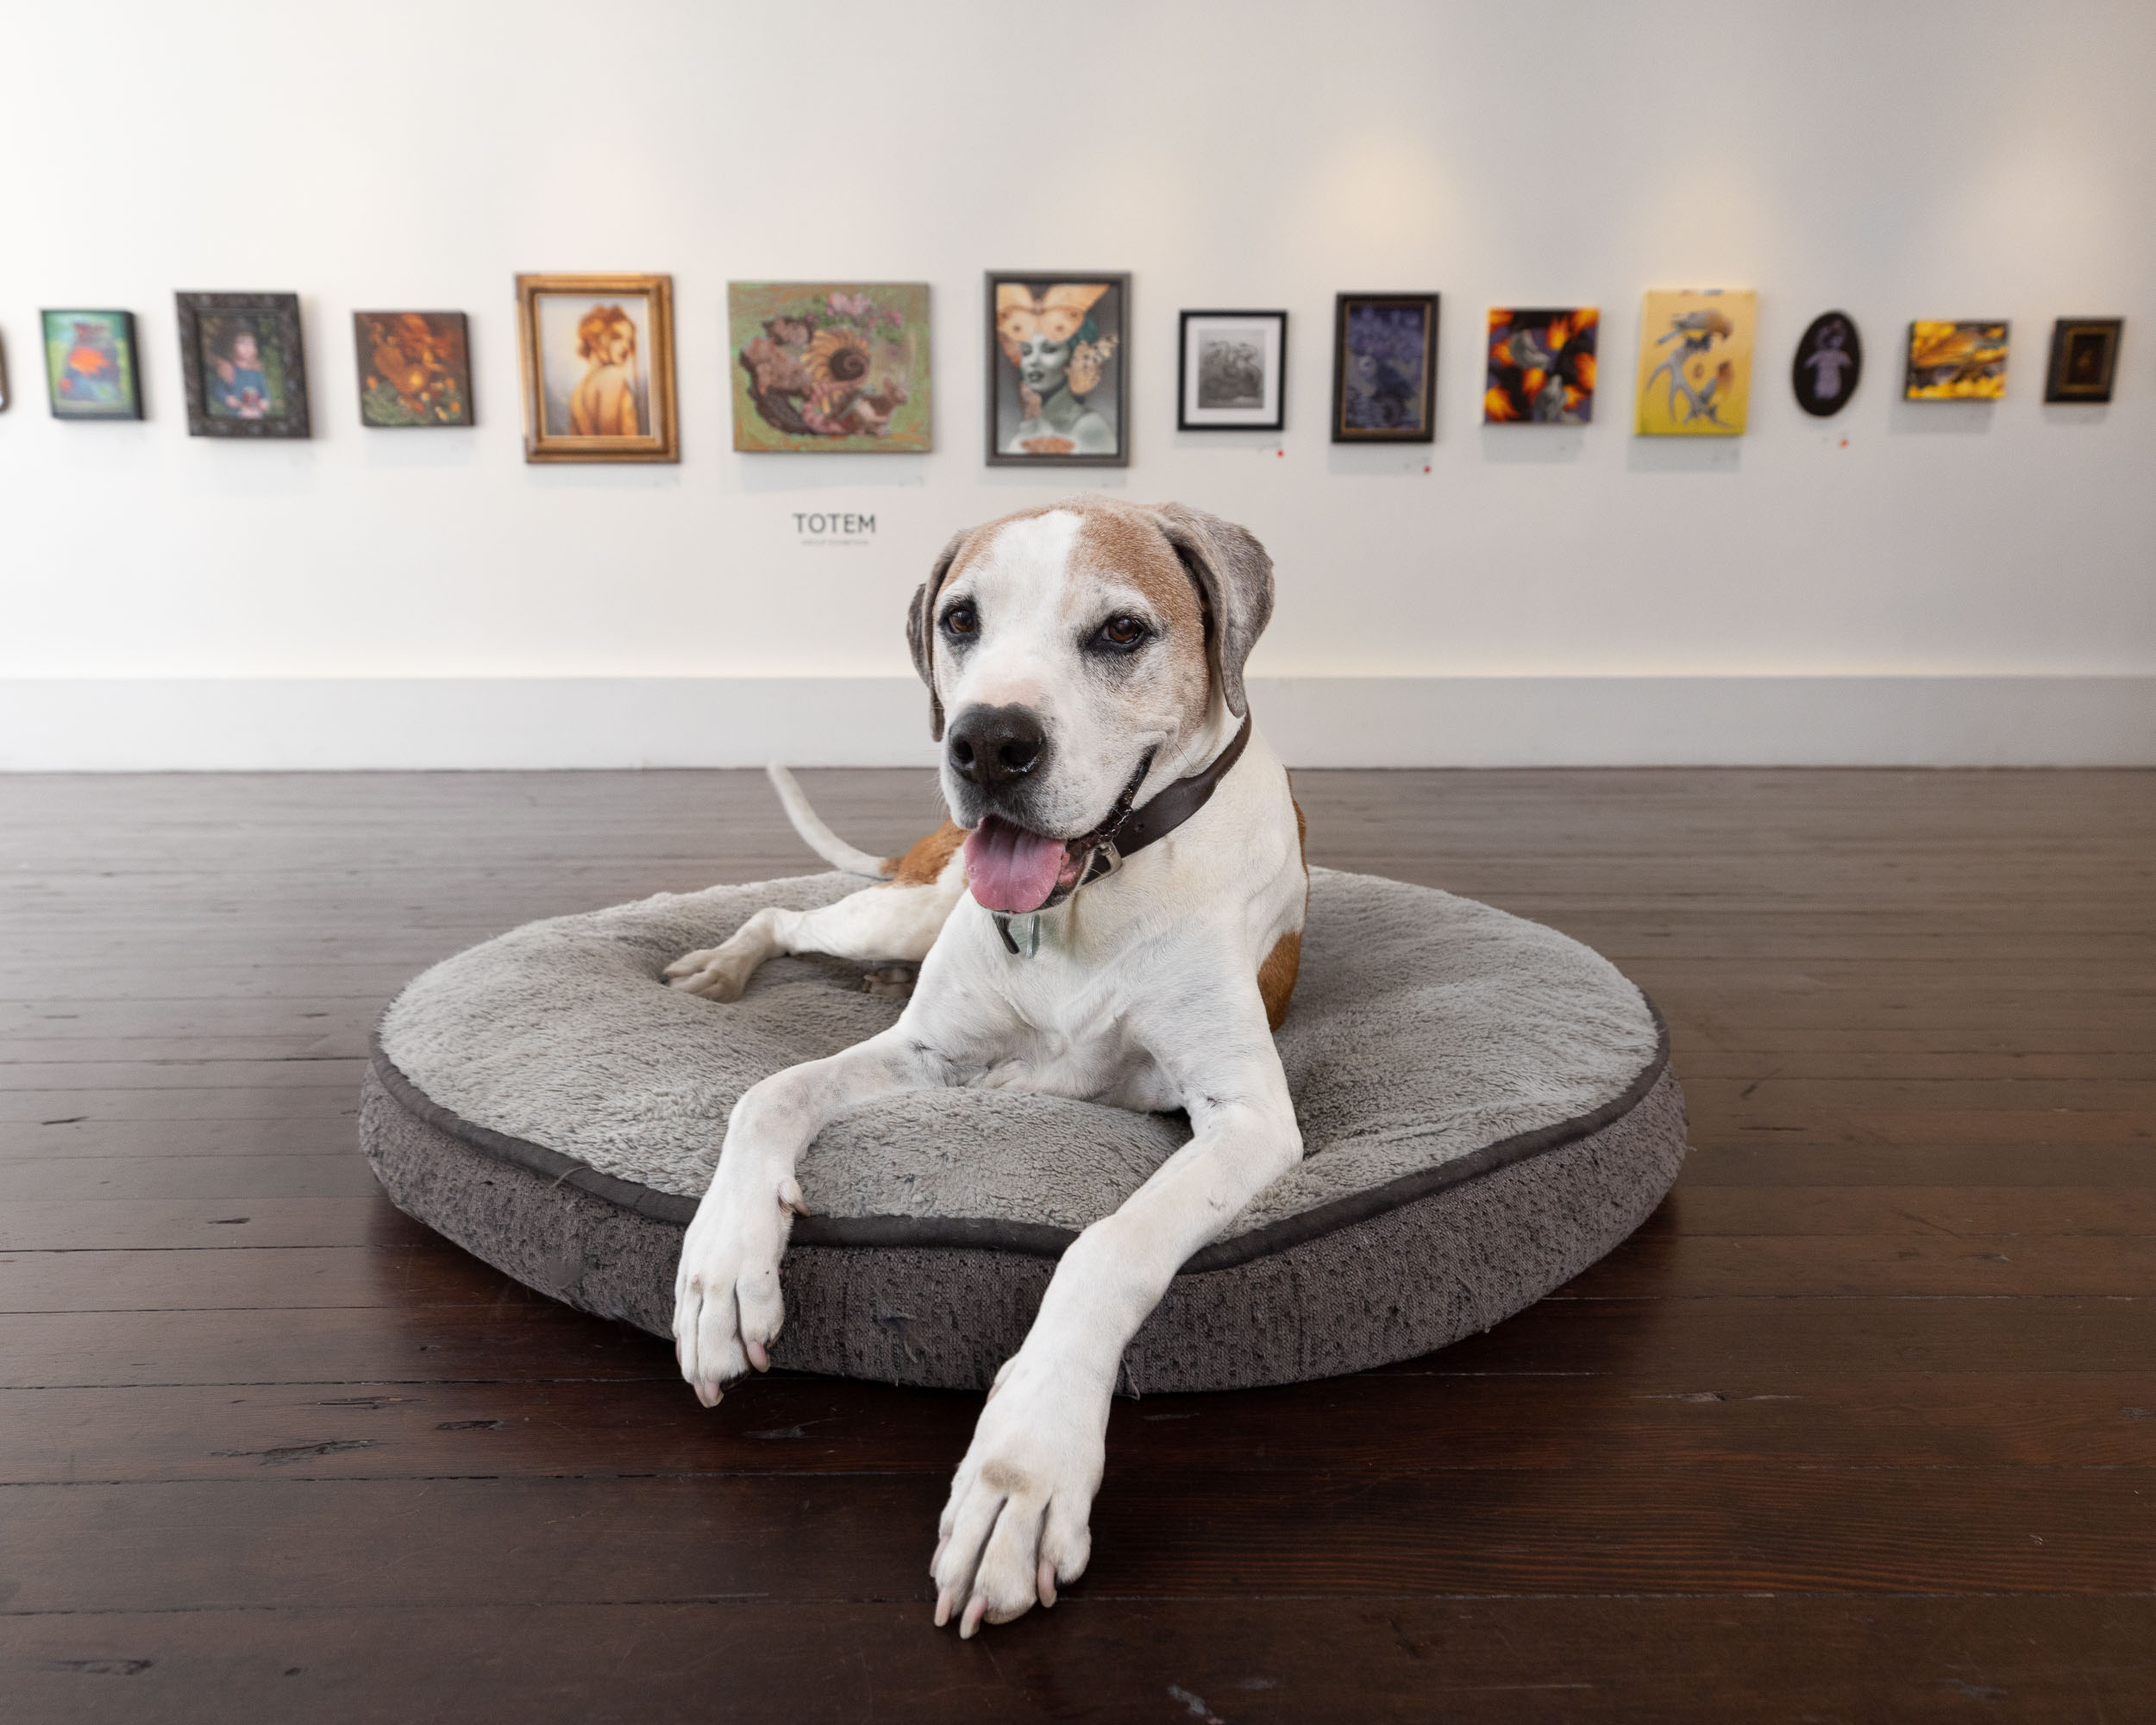 large-friendly-mixed-breed-dog-on-bed-in-art-gallery-4975